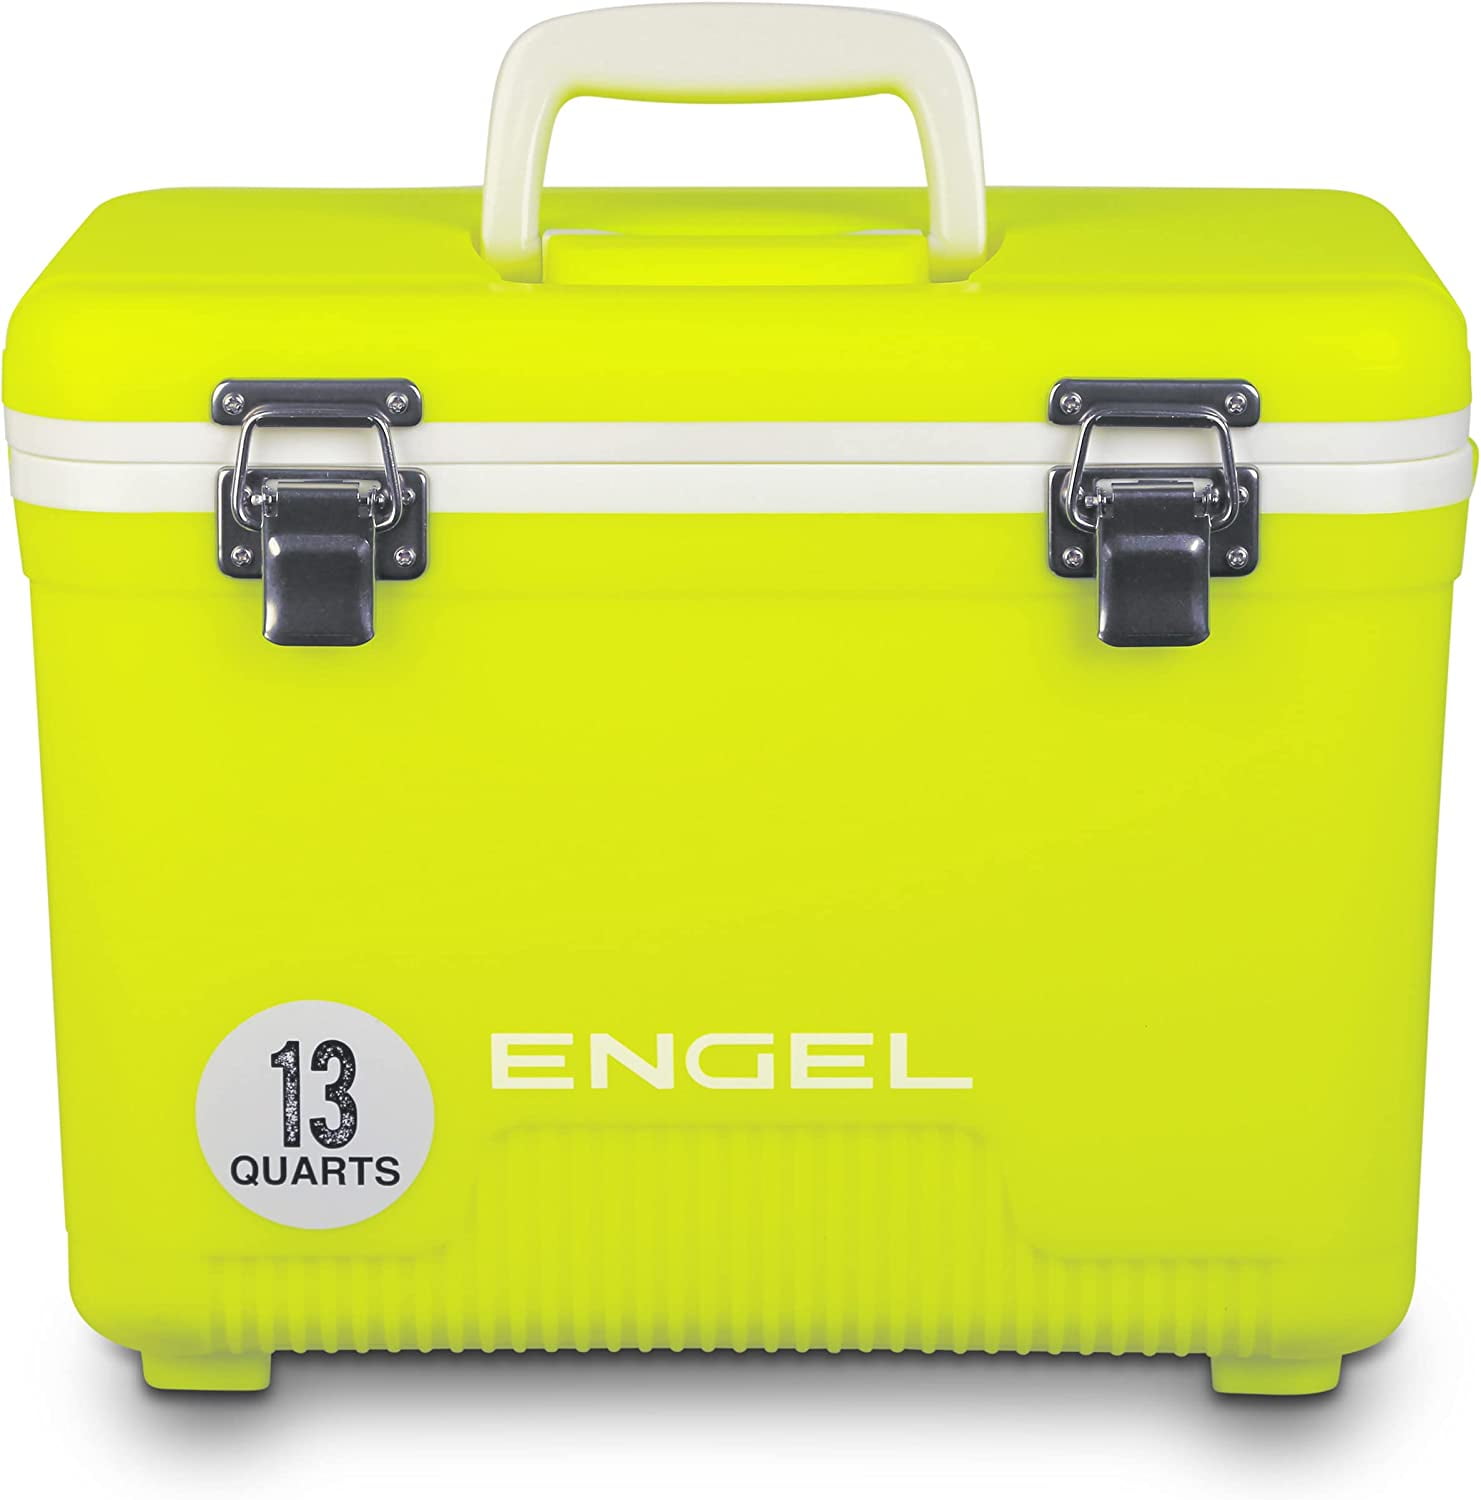 ENGEL 13 Qt Leak-Proof Compact Insulated Drybox Cooler - Yellow  High-Visibility 